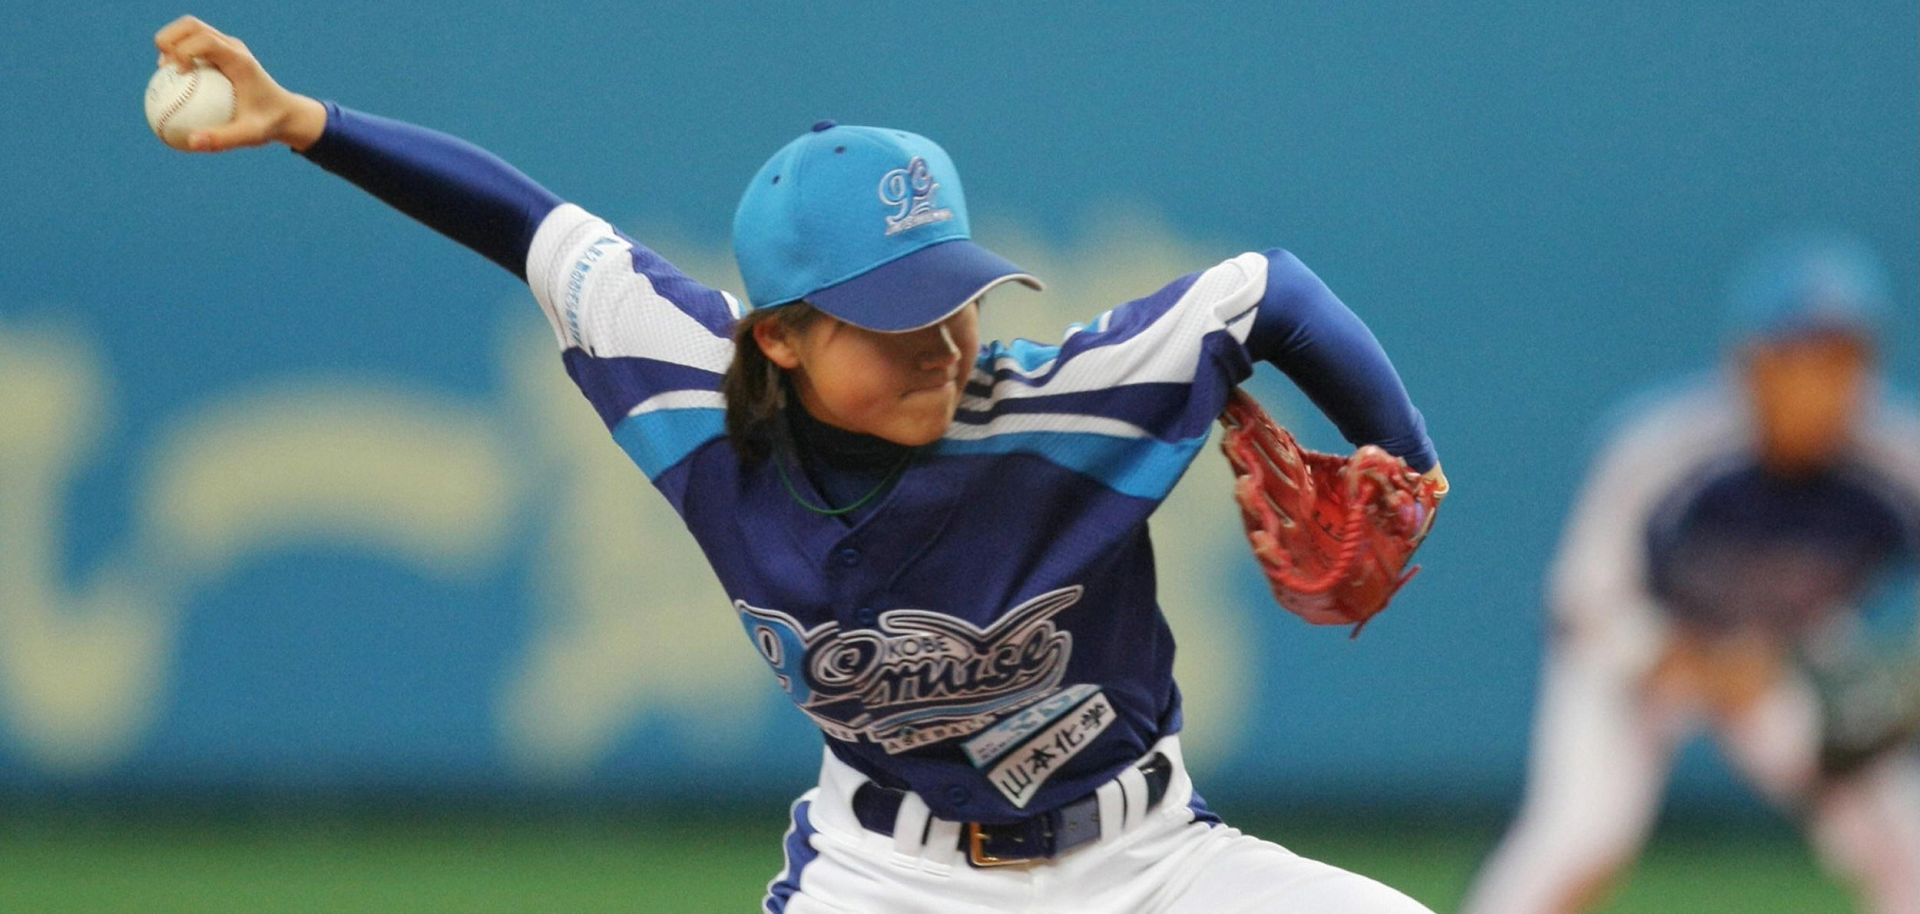 Toni Stone broke baseball gender barrier, and she's finally getting her due